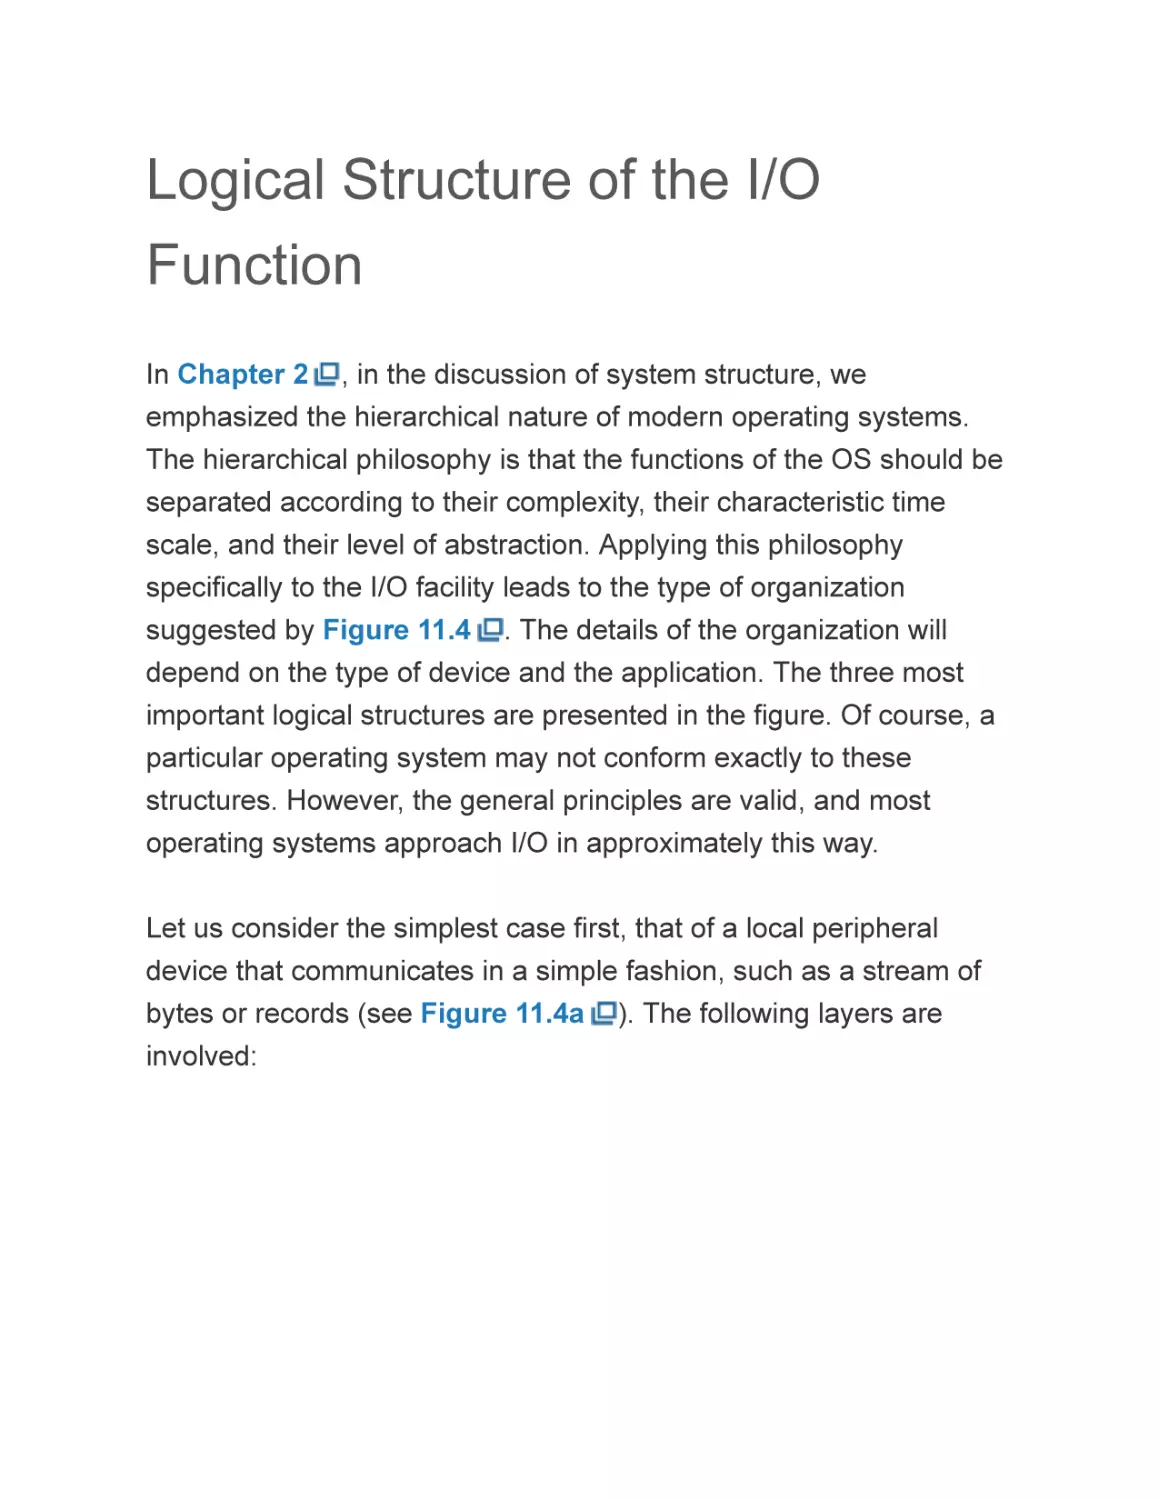 Logical Structure of the I/O Function